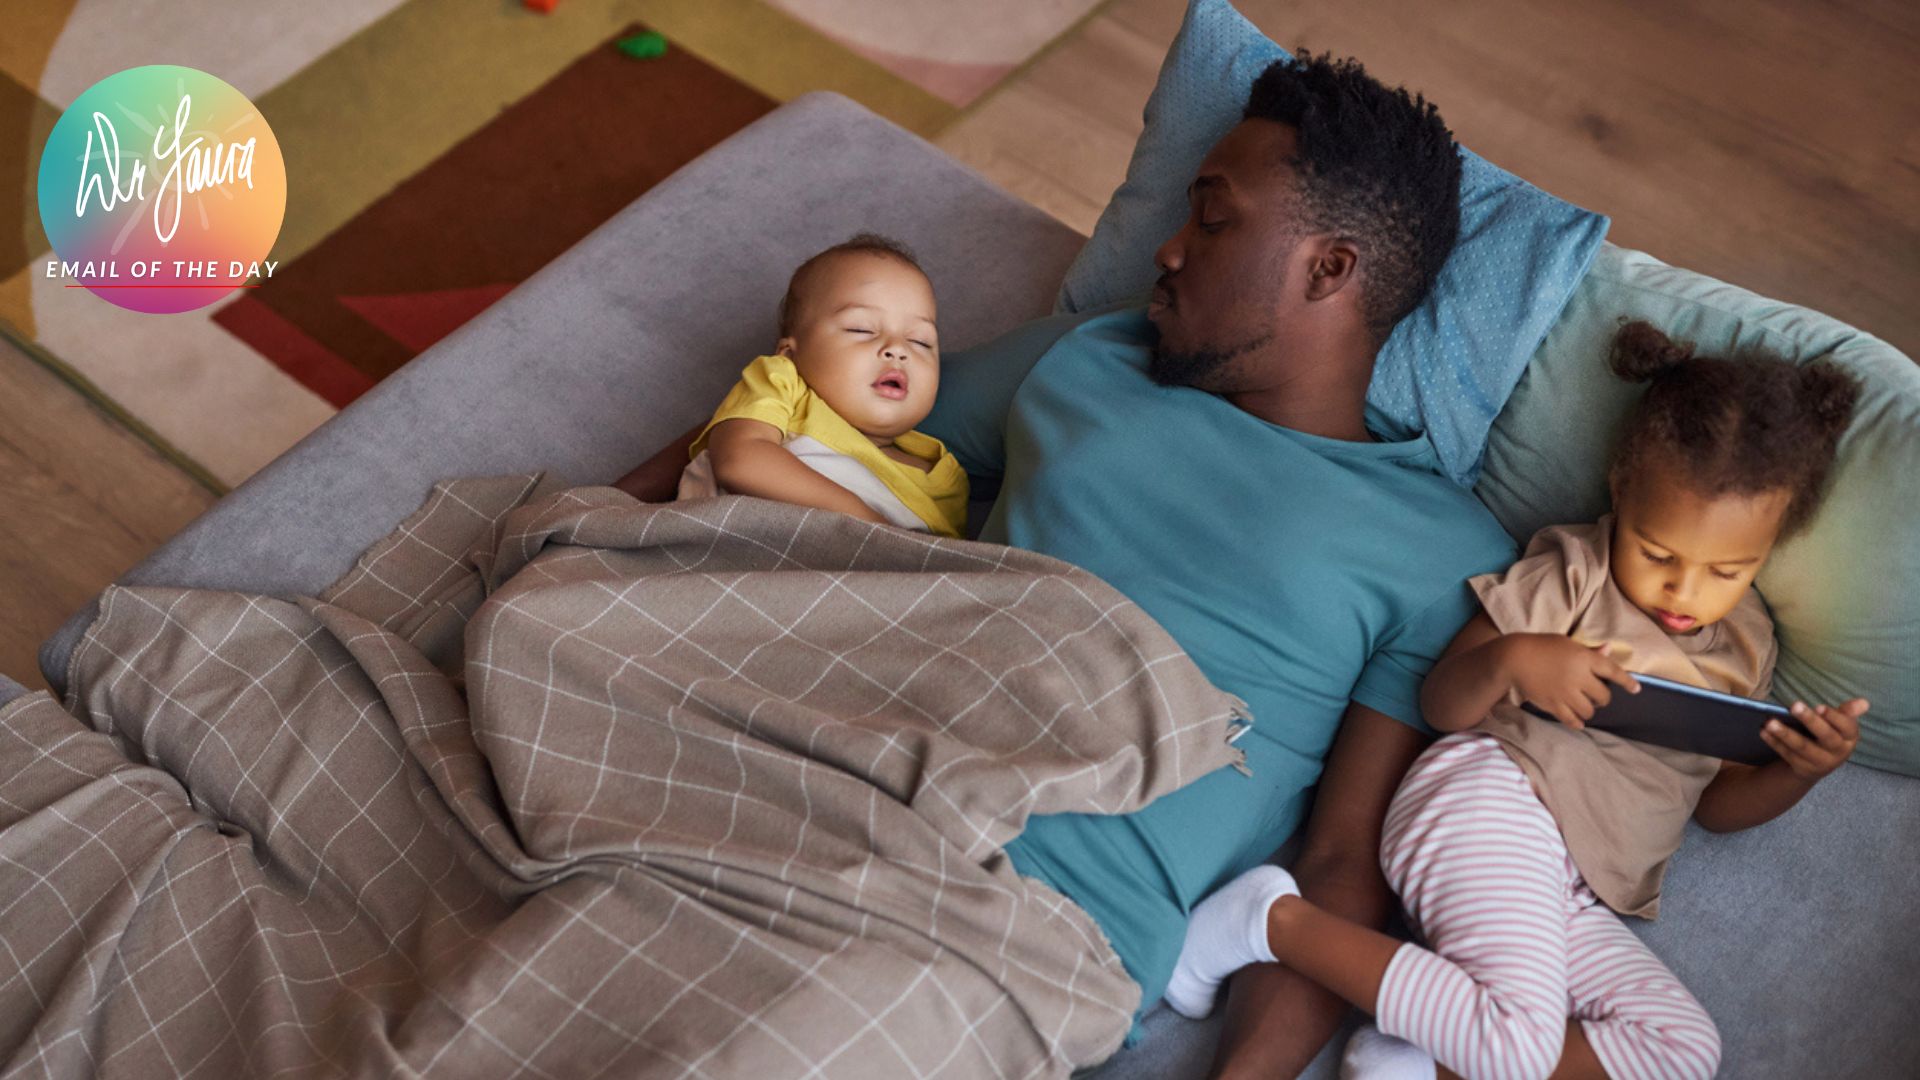 Man sleeps in bed while holding onto sleeping baby and young female toddler sleeps next to him